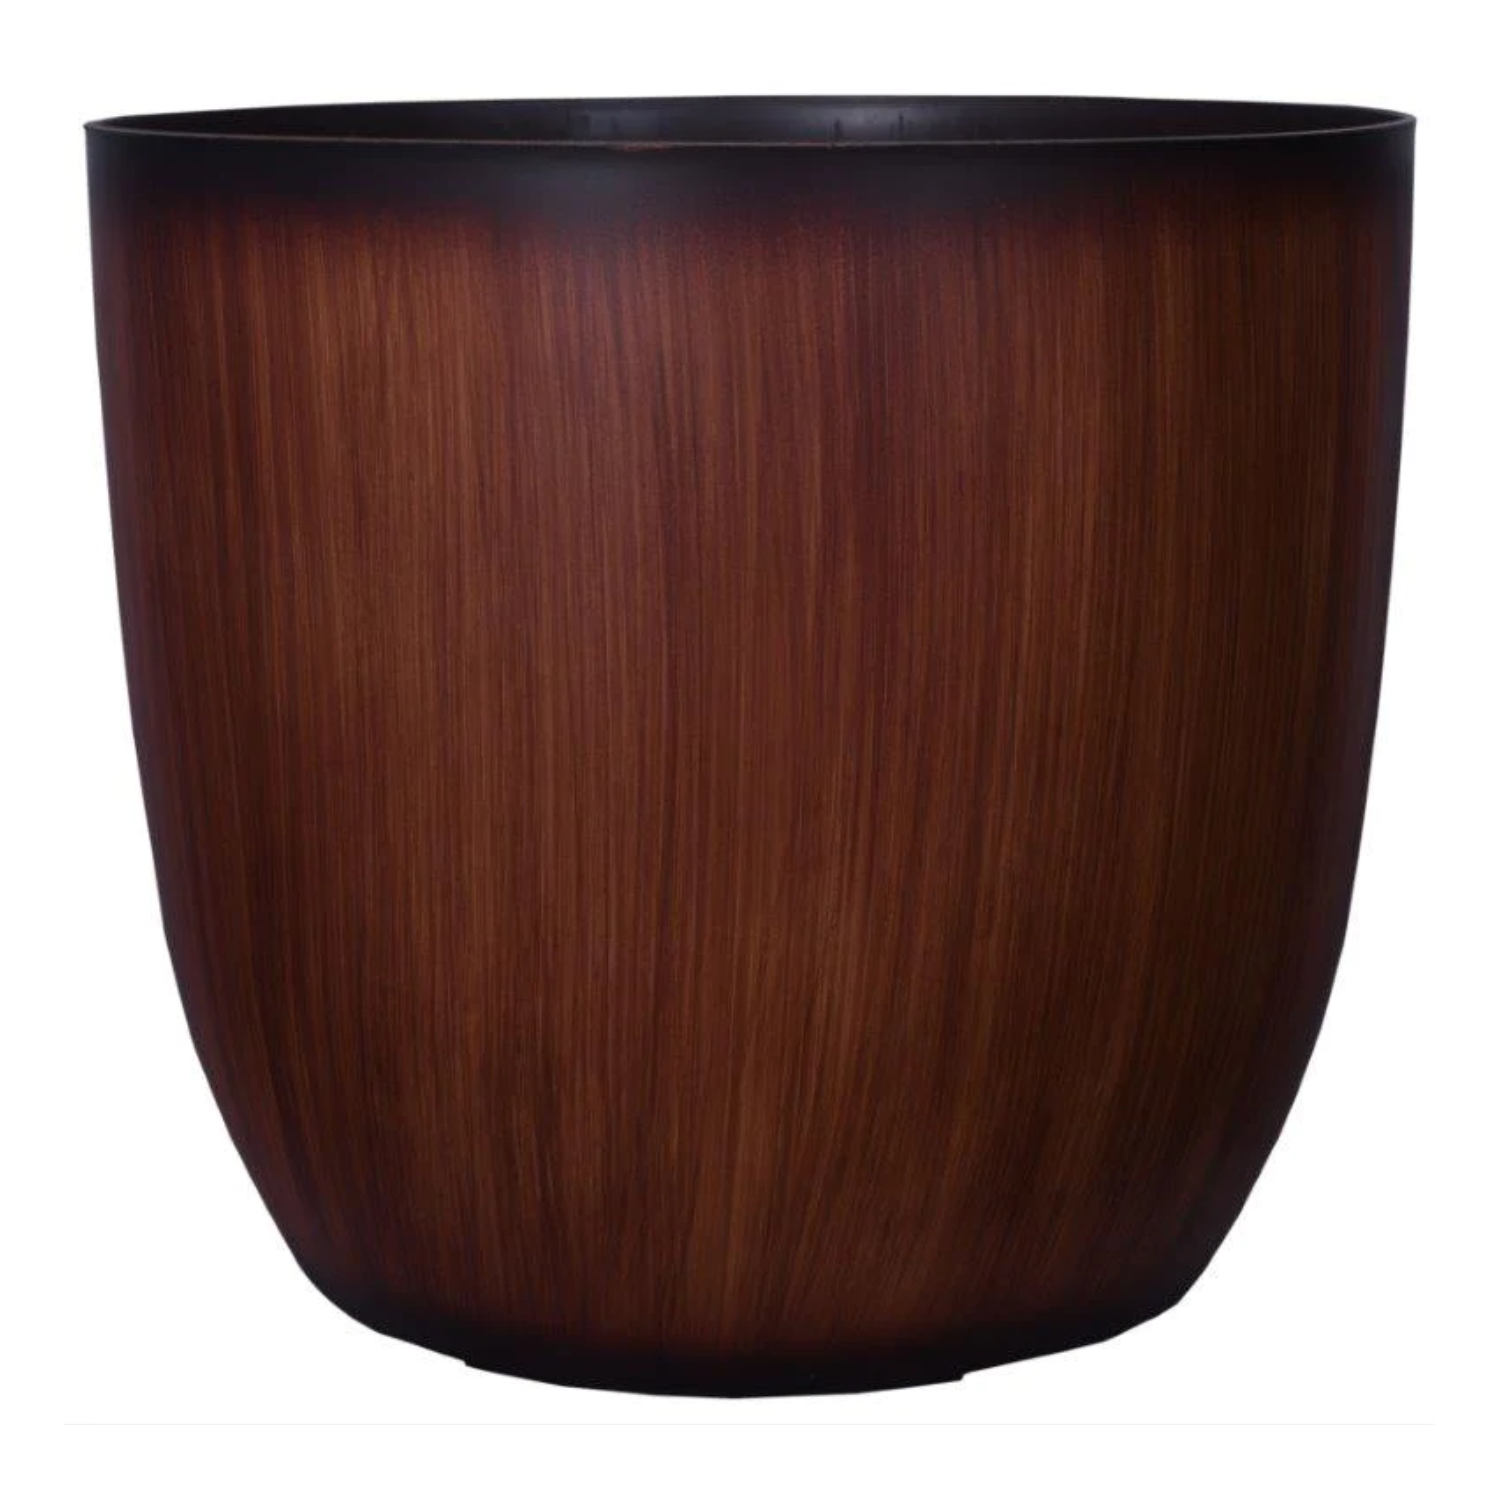 Ronda 2926 Round Plastic Pot (Wooden Finish) (Without Self-Watering Kit)